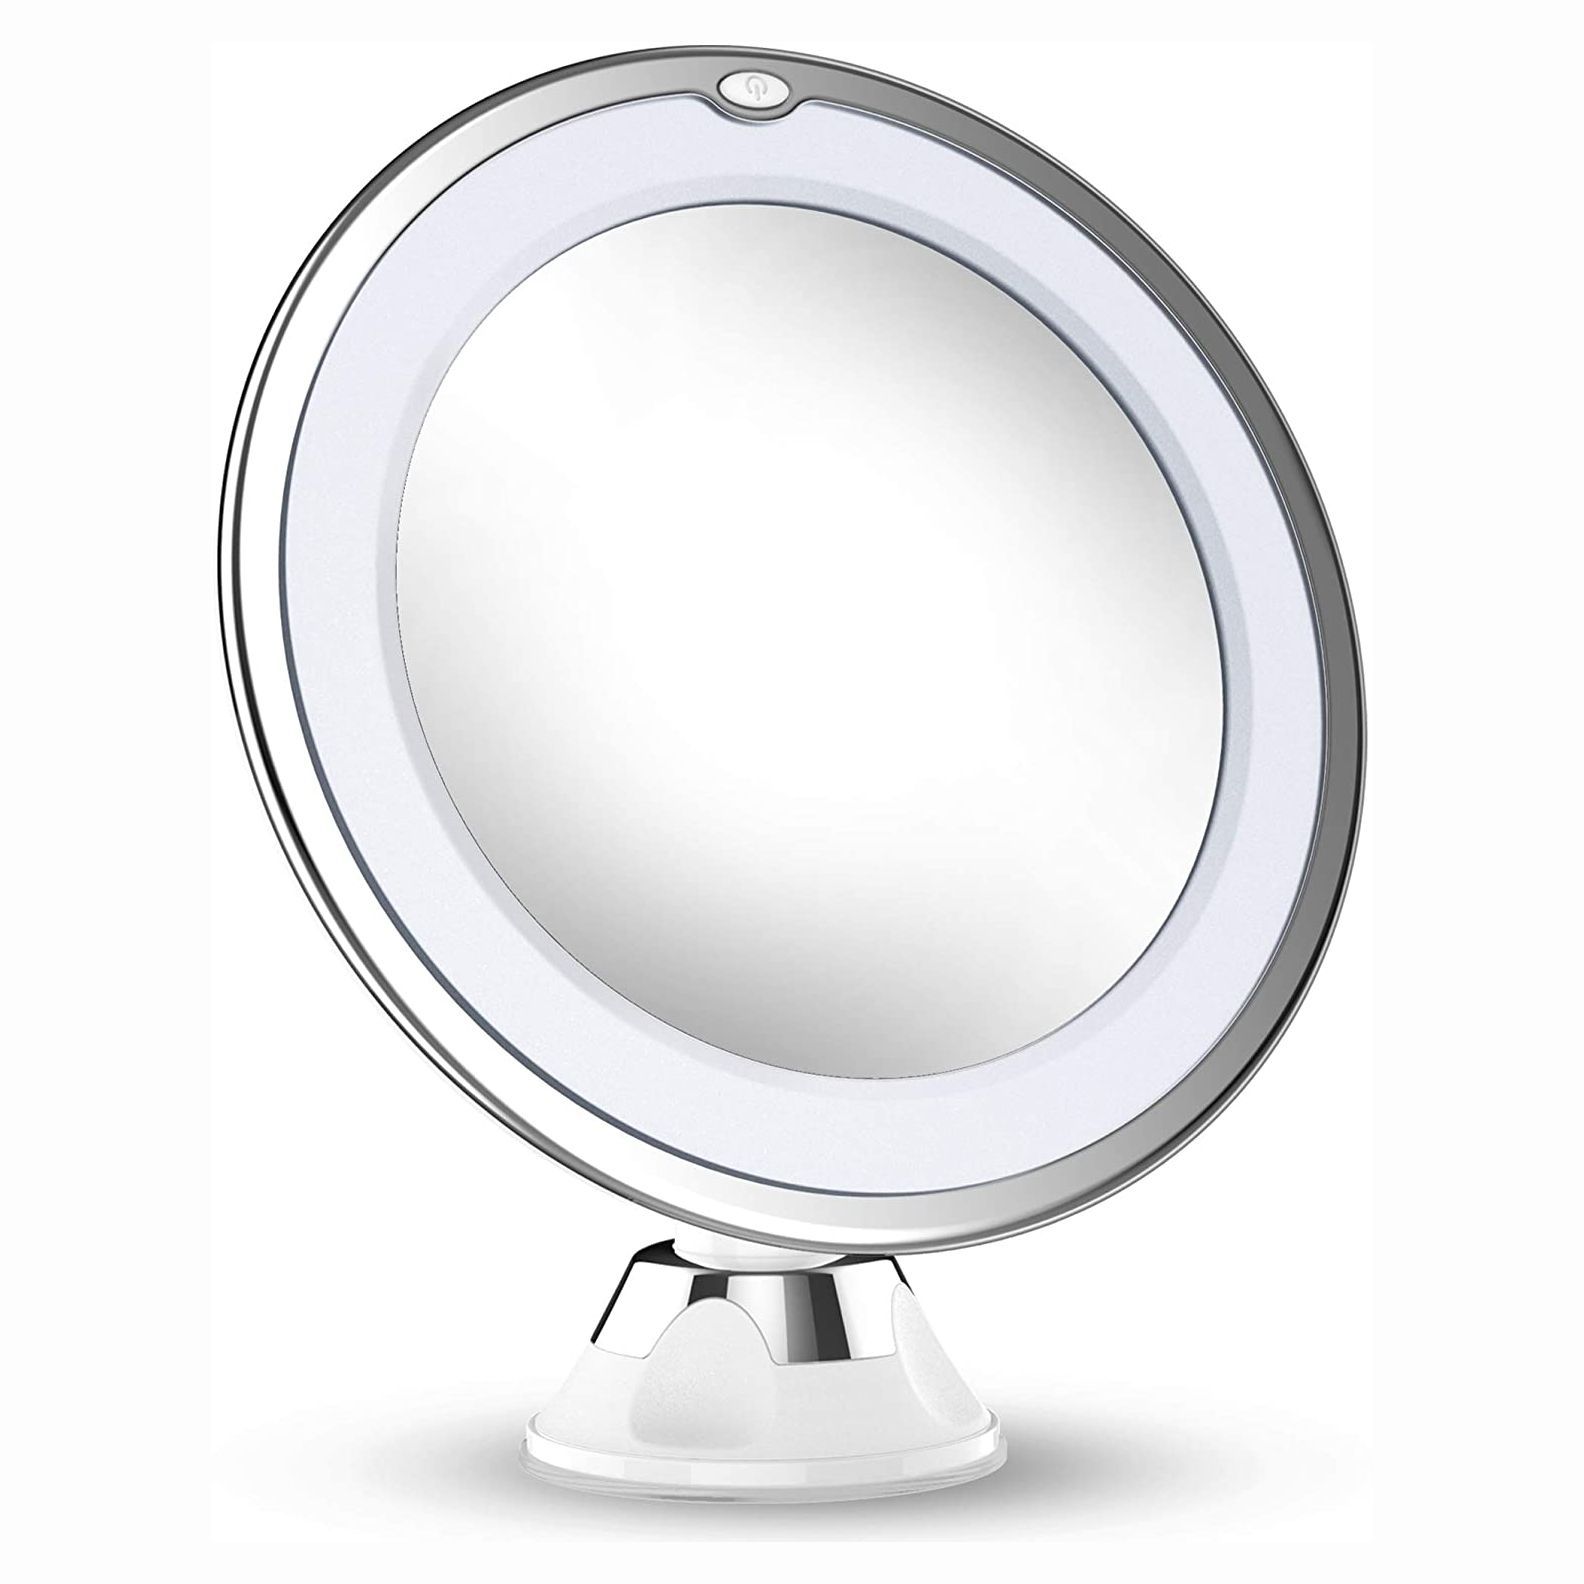 Vanity Makeup Mirrors With Lights, Vanity Mirror Stand Alone